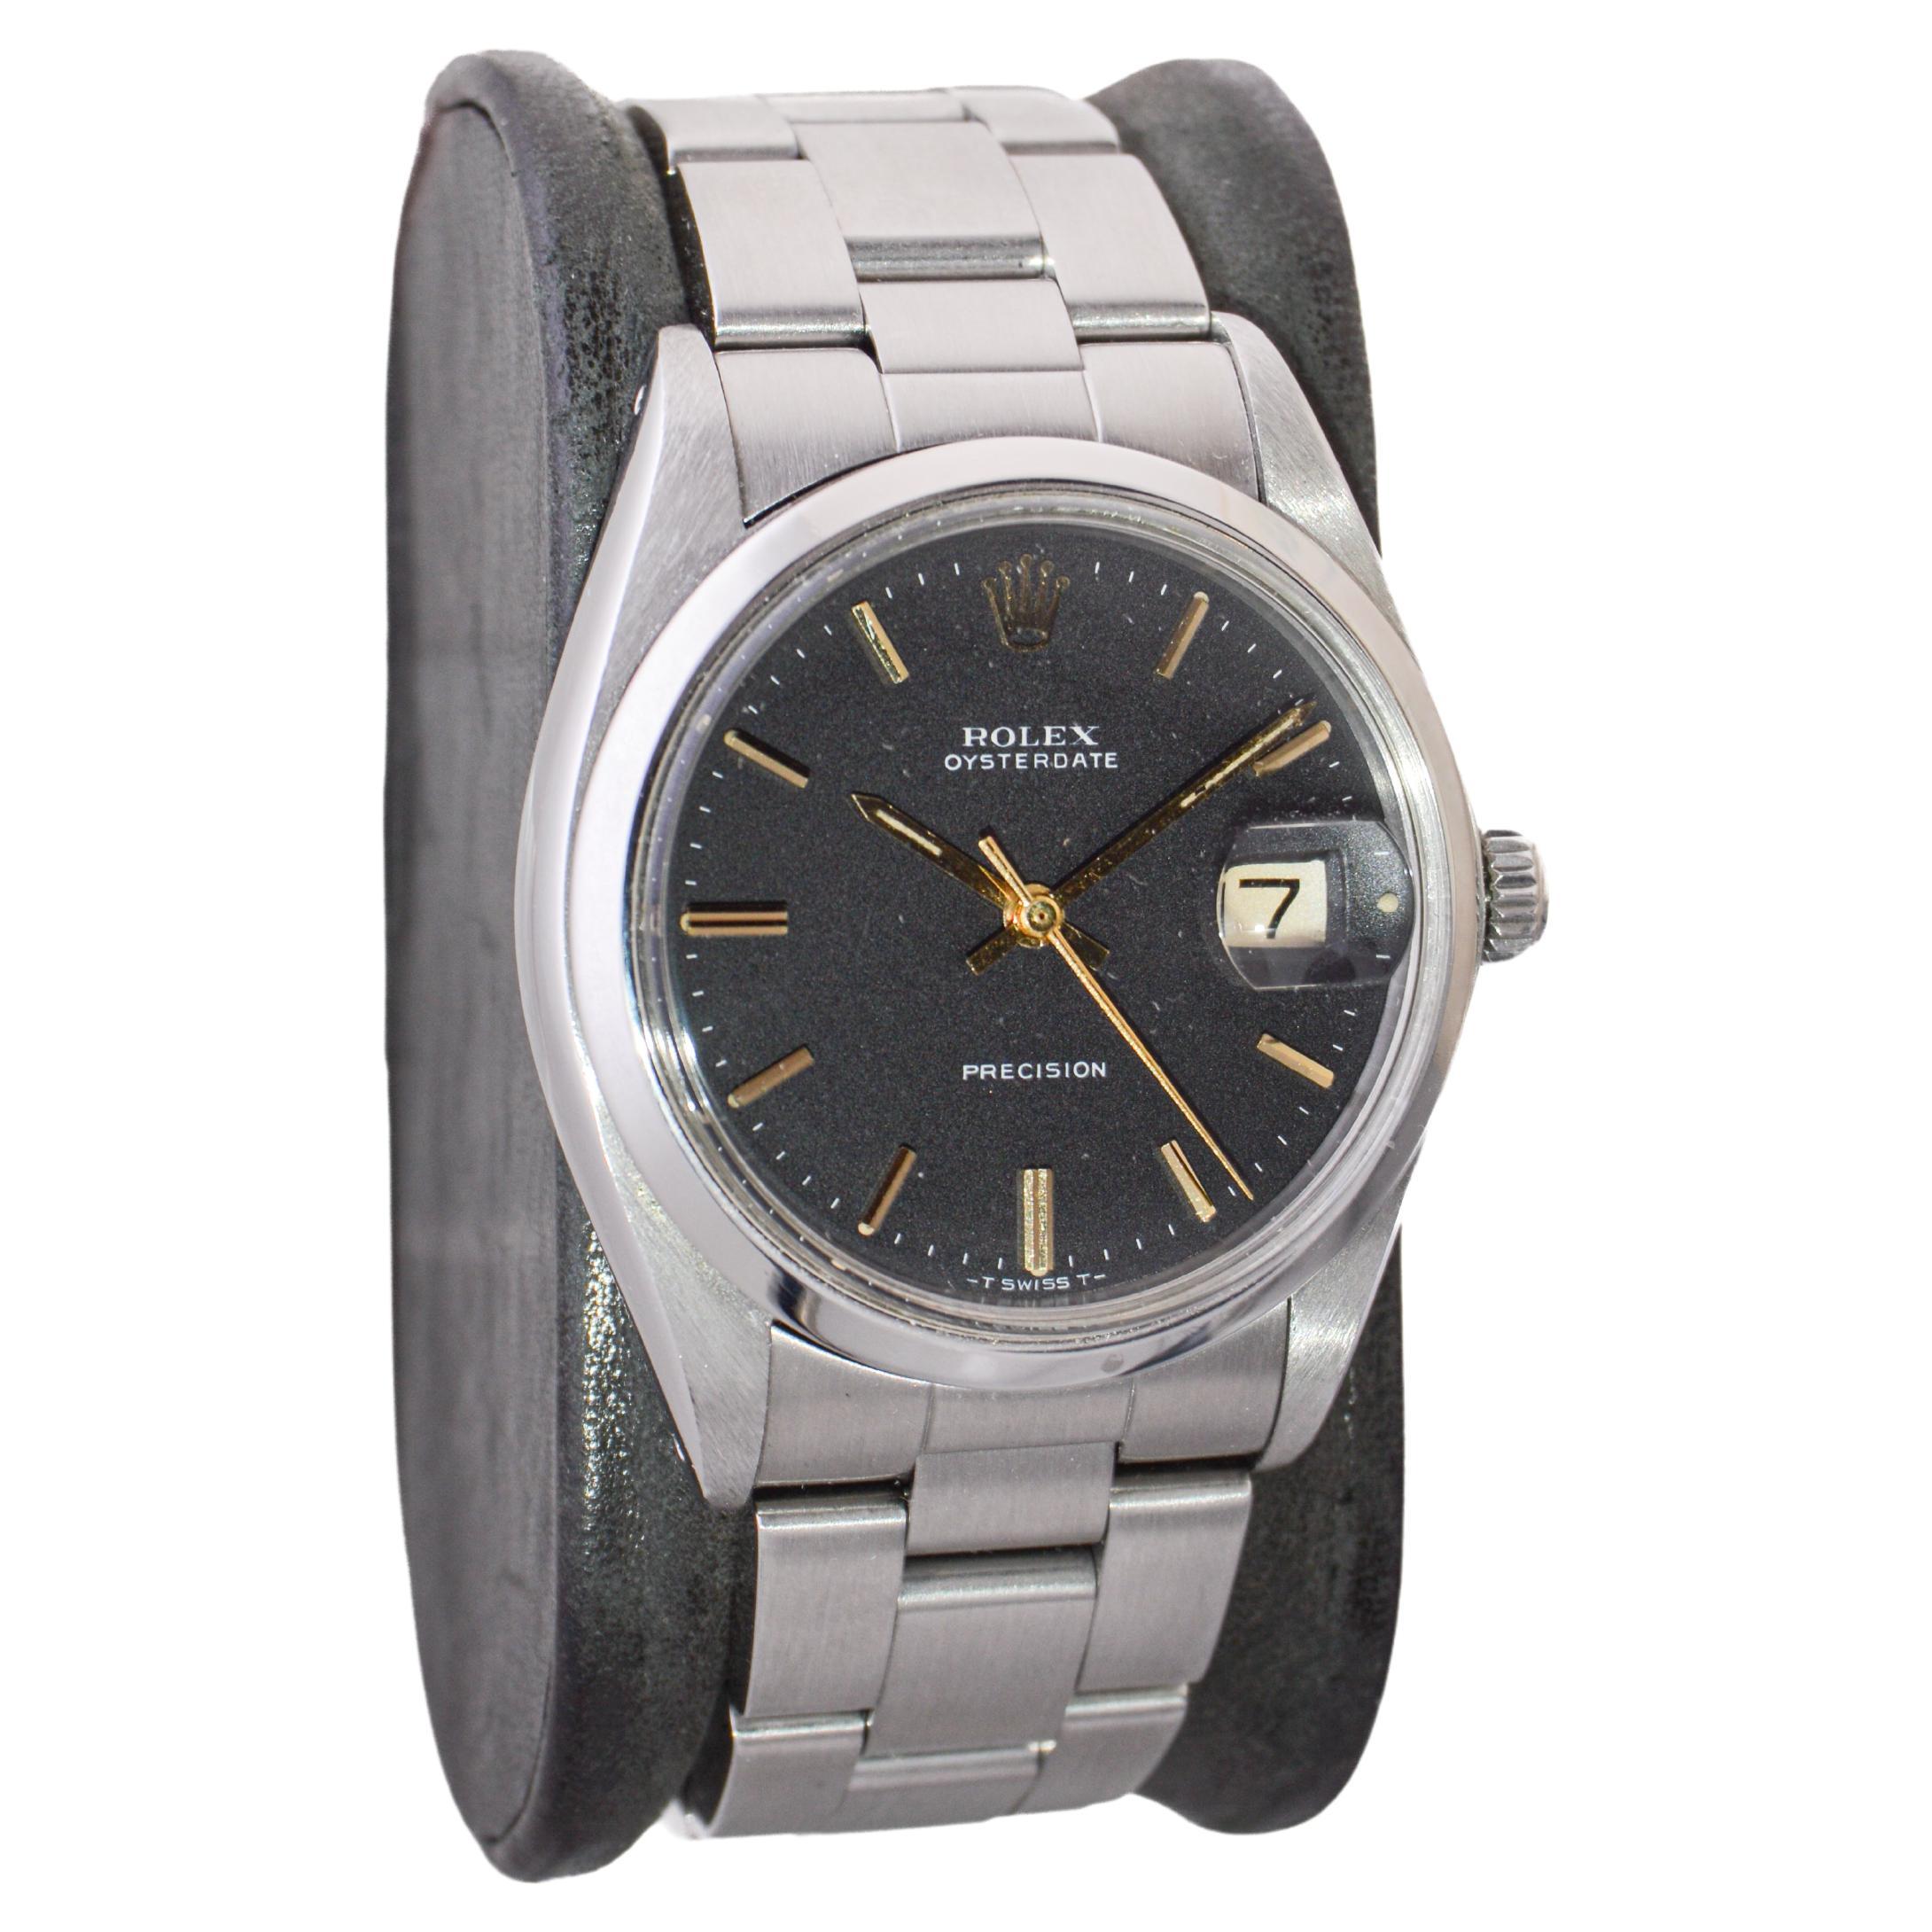 FACTORY / HOUSE: Rolex Watch Company
STYLE / REFERENCE: Oysterdate / Reference 6694
METAL / MATERIAL: Stainless Steel
CIRCA / YEAR: 1970's
DIMENSIONS / SIZE: Length 39mm X Diameter 35mm
MOVEMENT / CALIBER: Manual Winding / 17 Jewels / Caliber